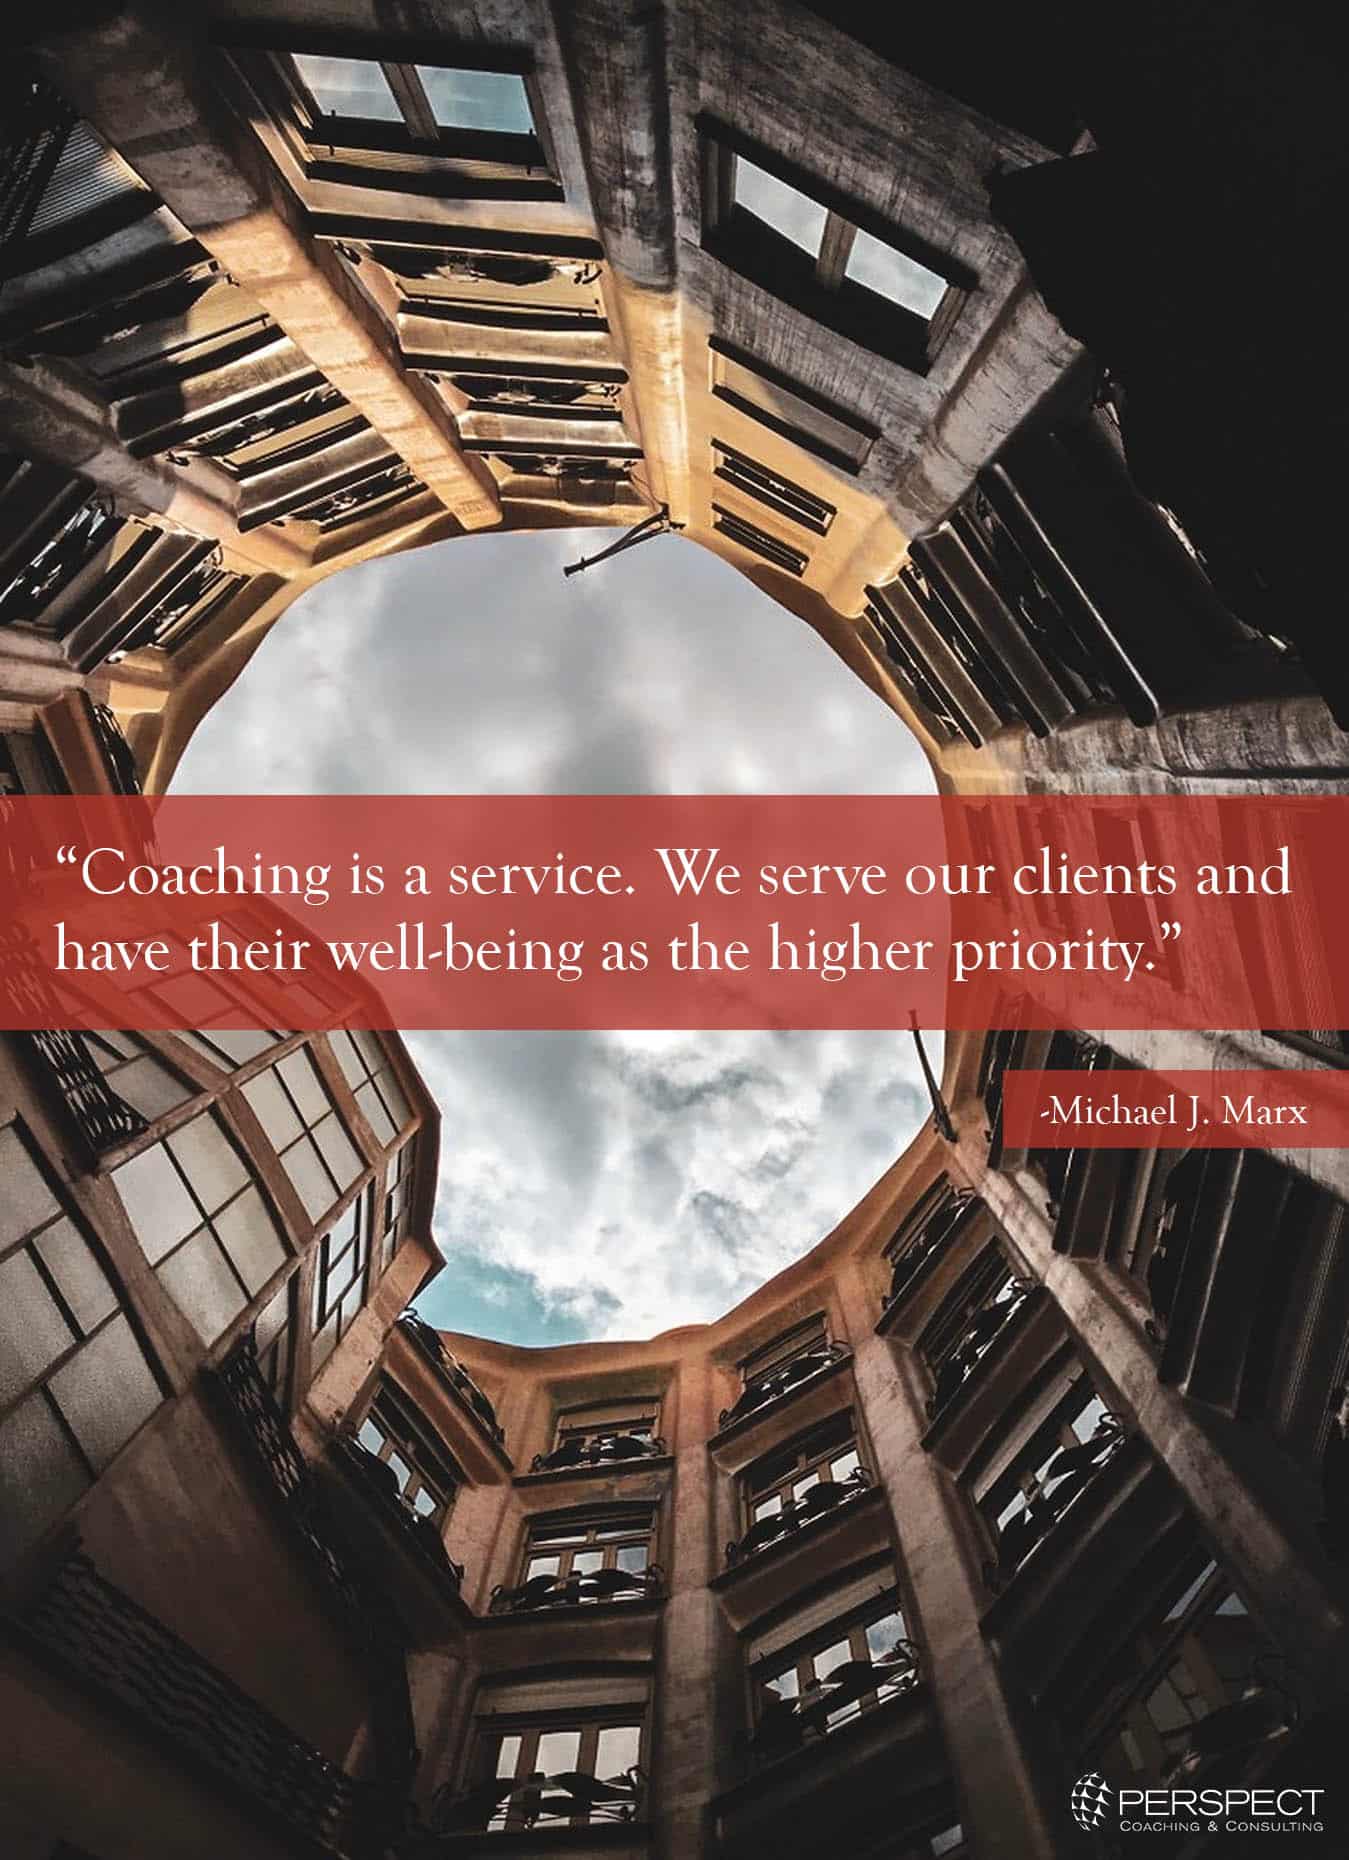 Coaching is a service. We serve our clients and have their well-being as the higher priority